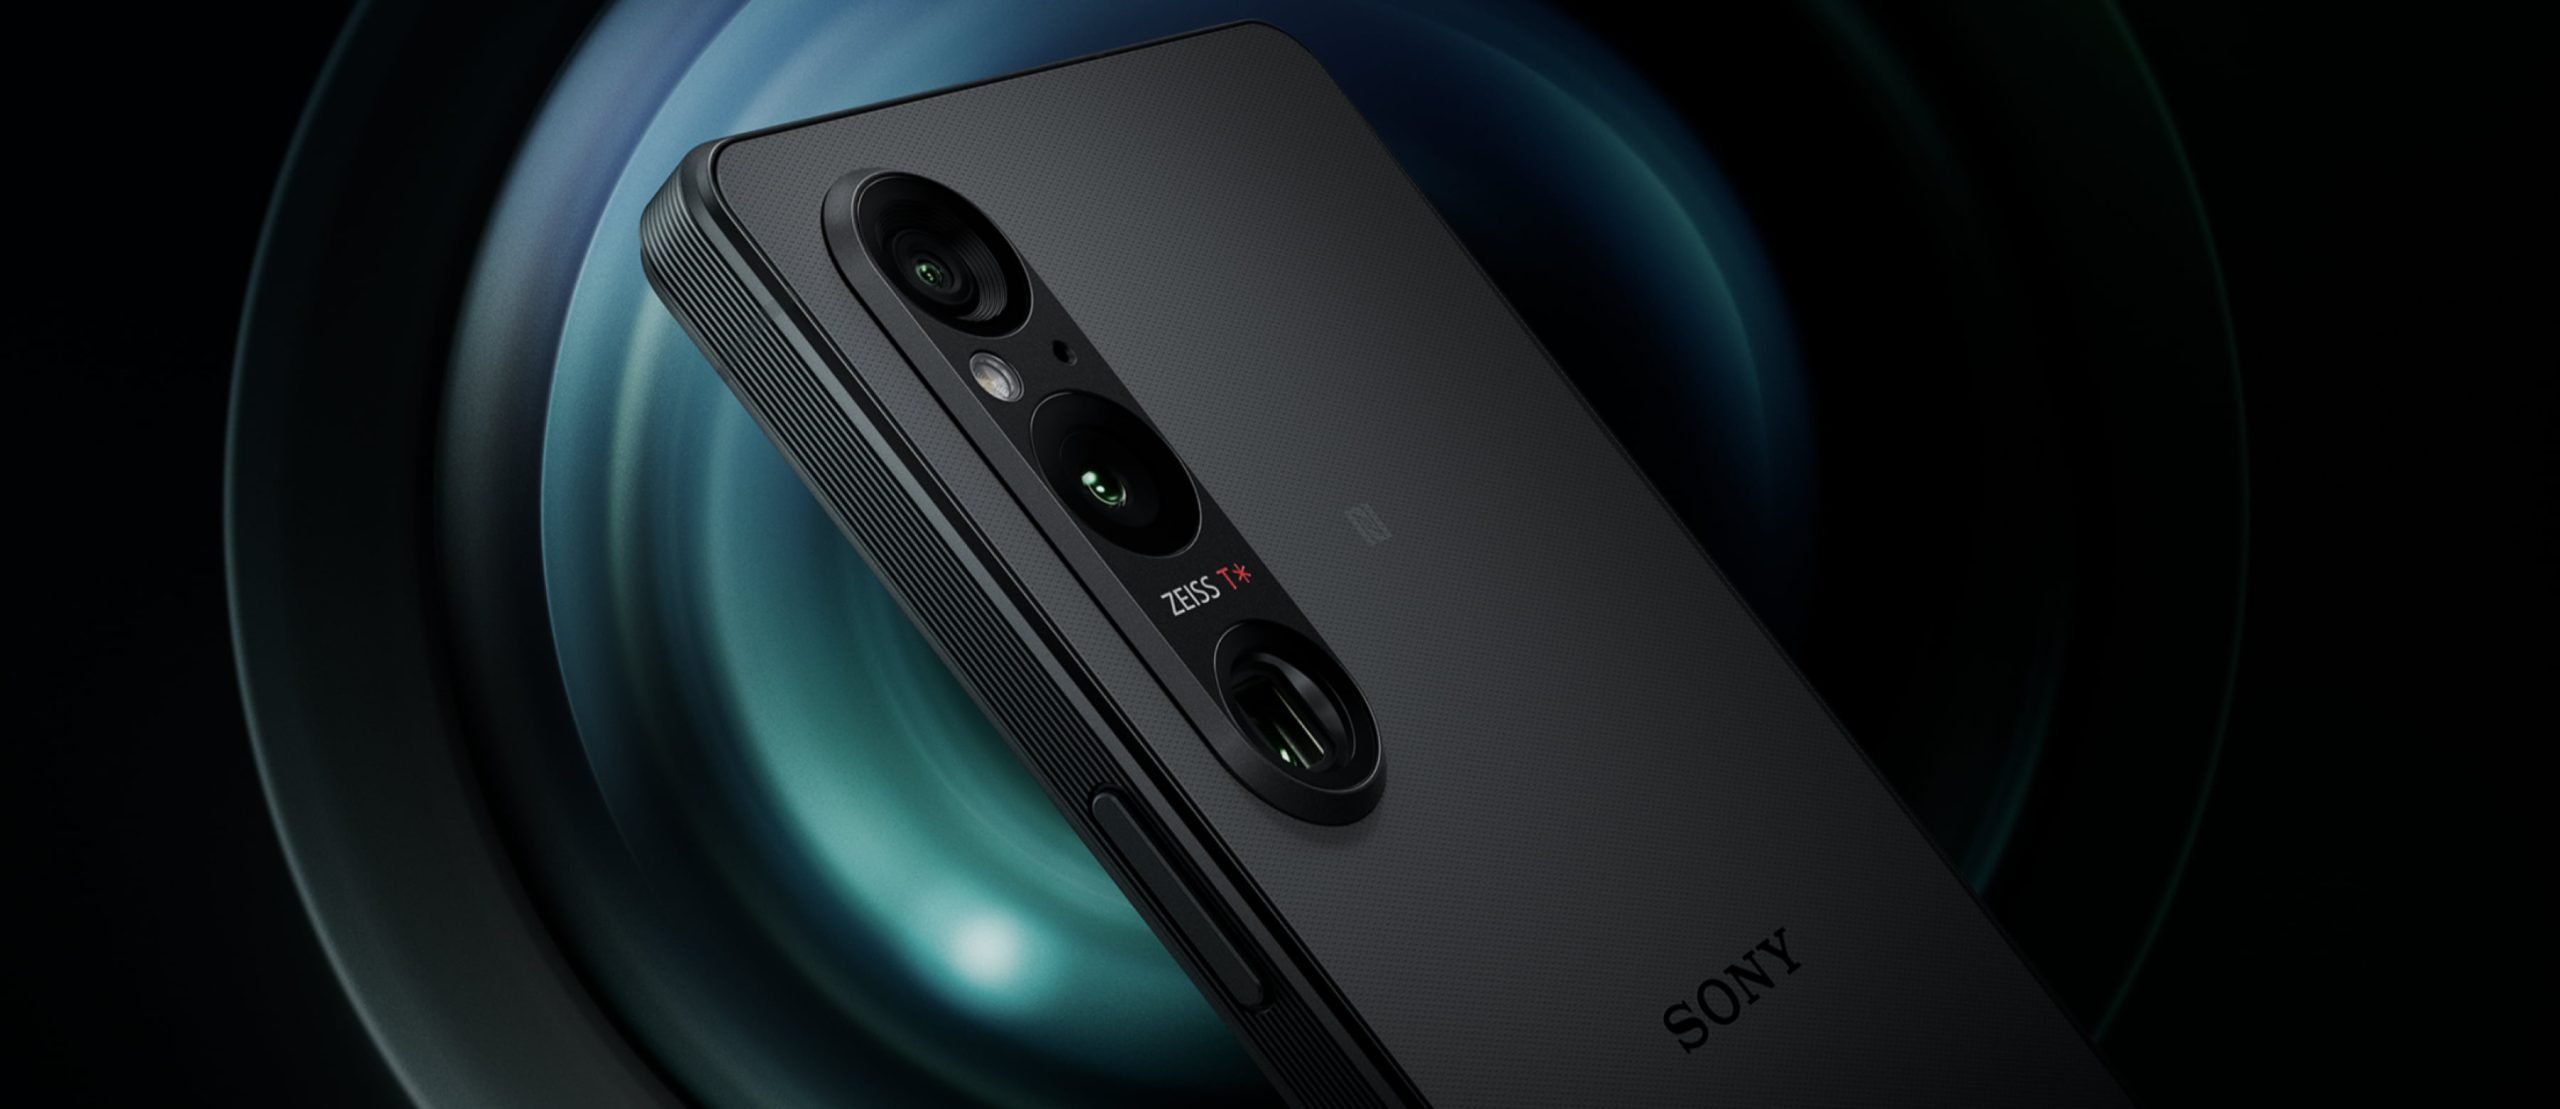 Alleged Sony Xperia 1 VI spotted on EMVCO database ahead of launch - News - News